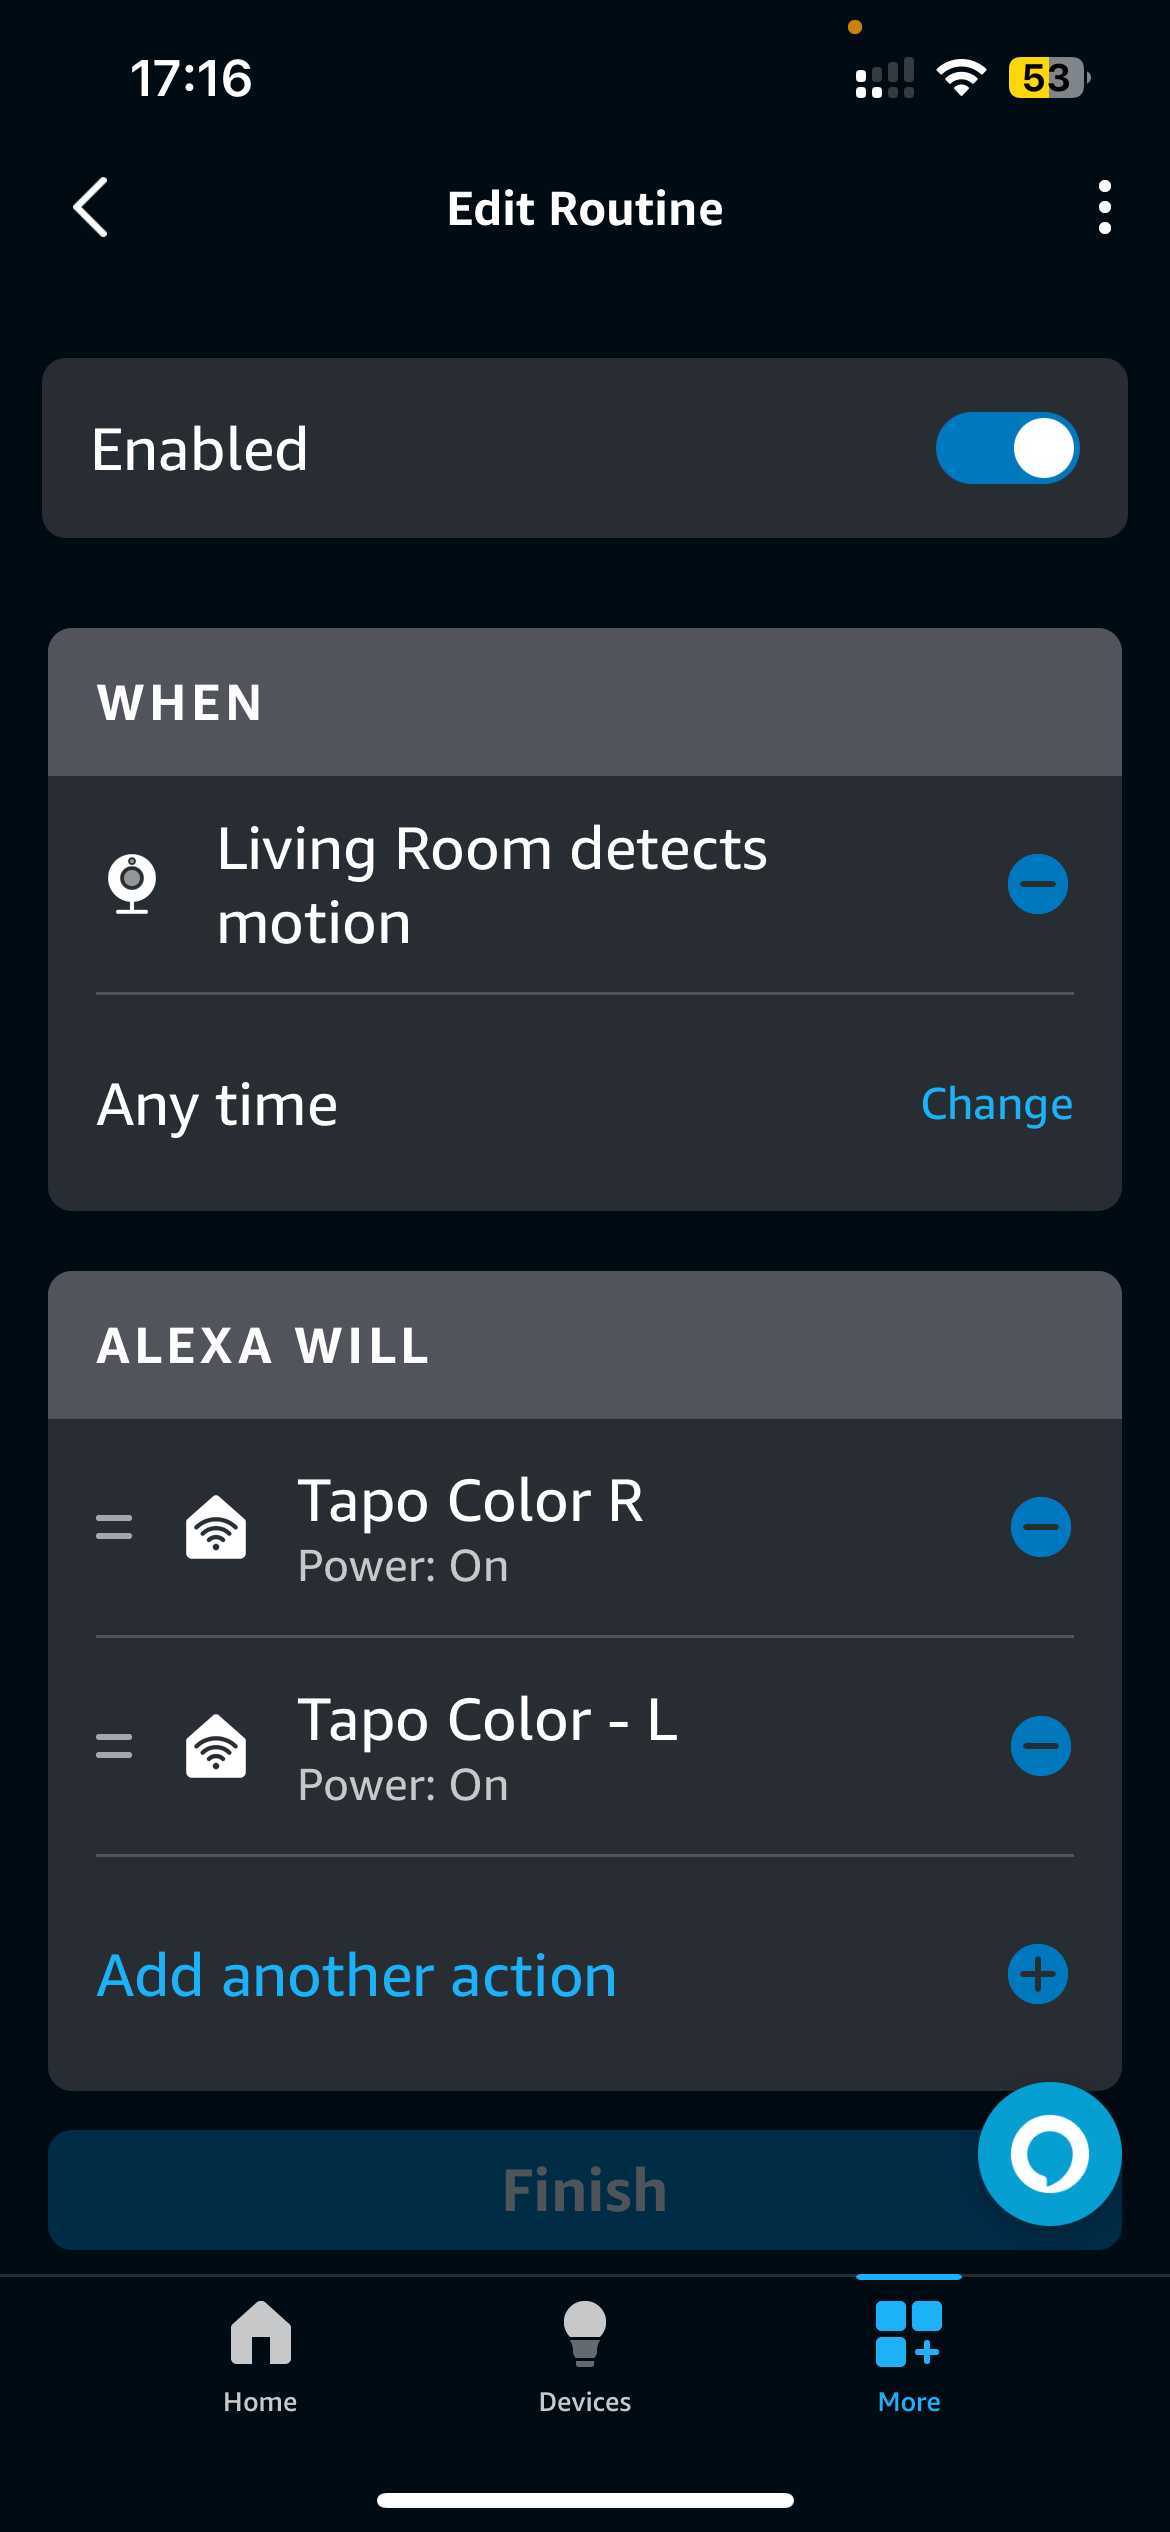 How to connect Blink cameras to Alexa?